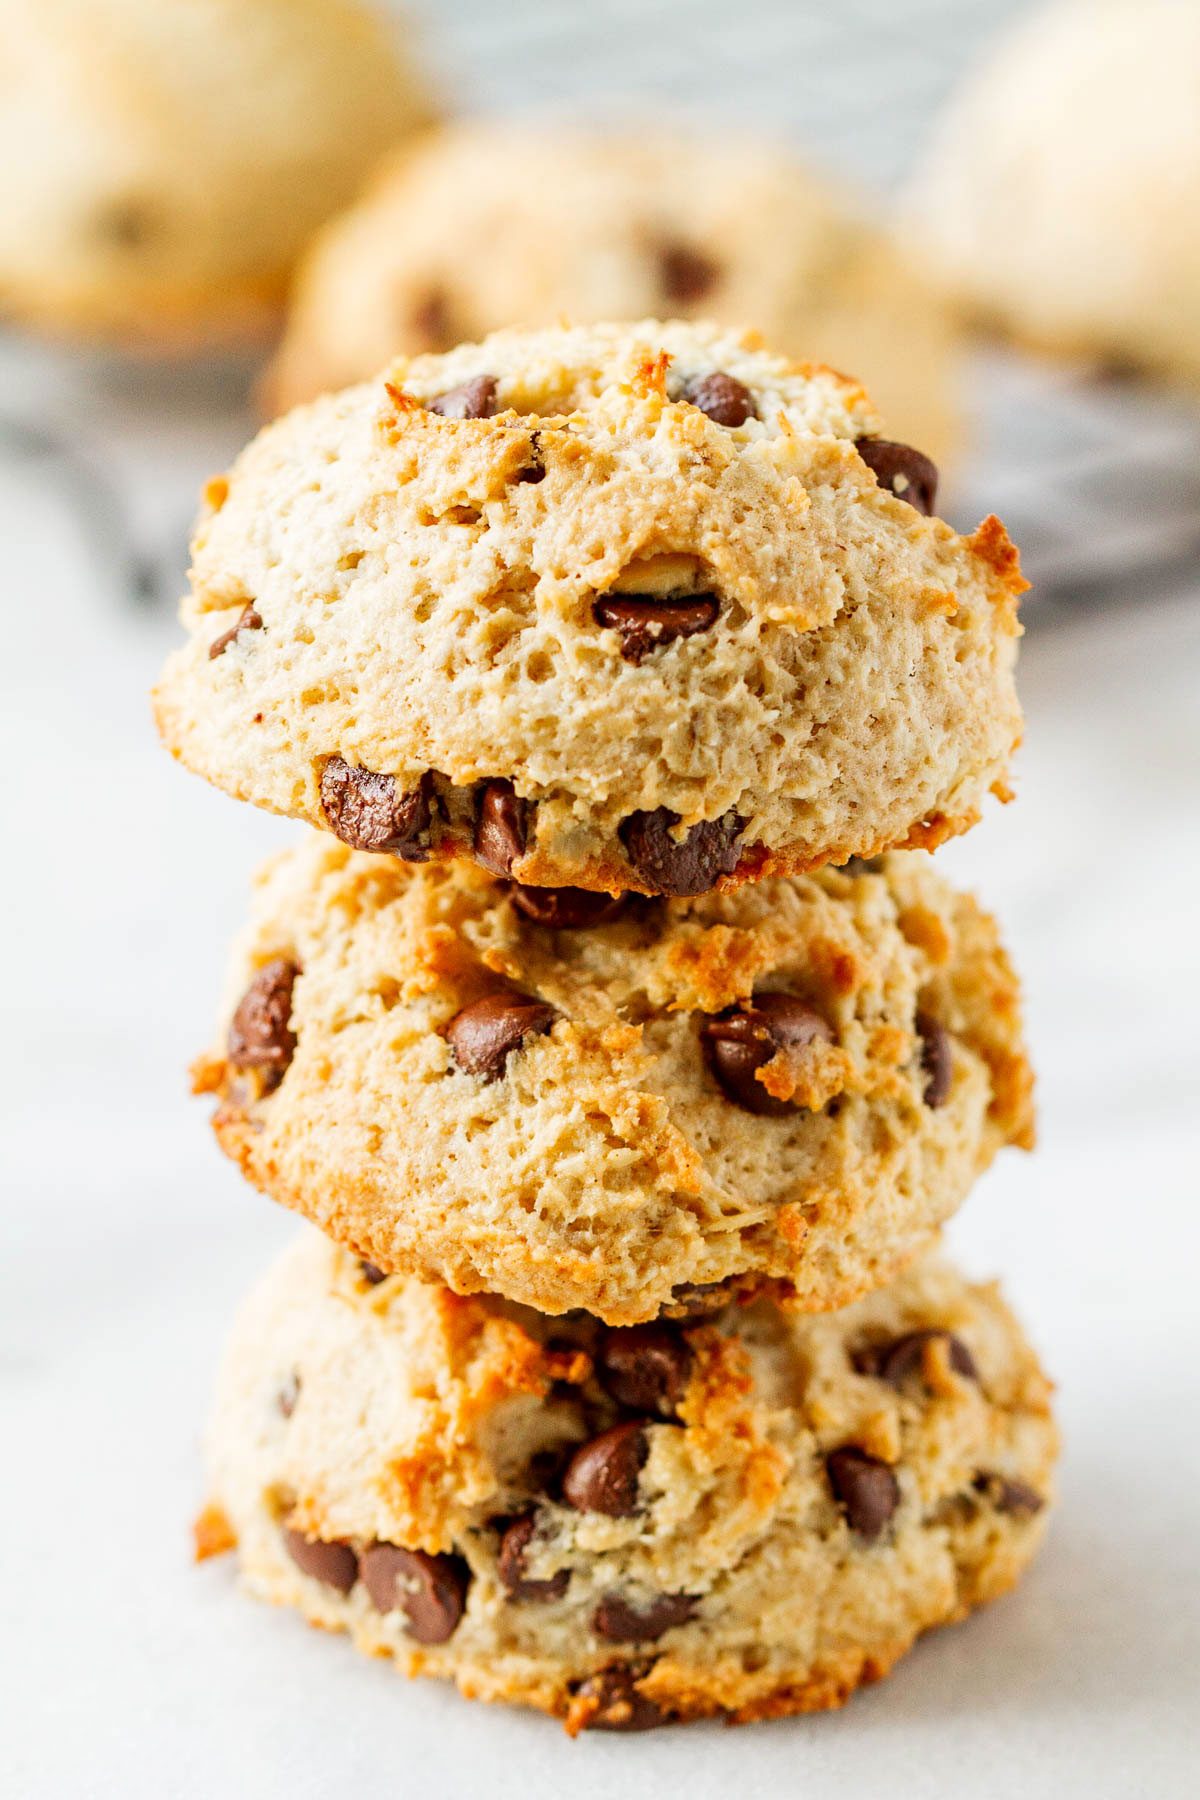 Chewy Oatmeal Cookies - Nutritious, tasty and super easy to make. These oatmeal cookies make a perfect grab-and-go breakfast for busy mornings!